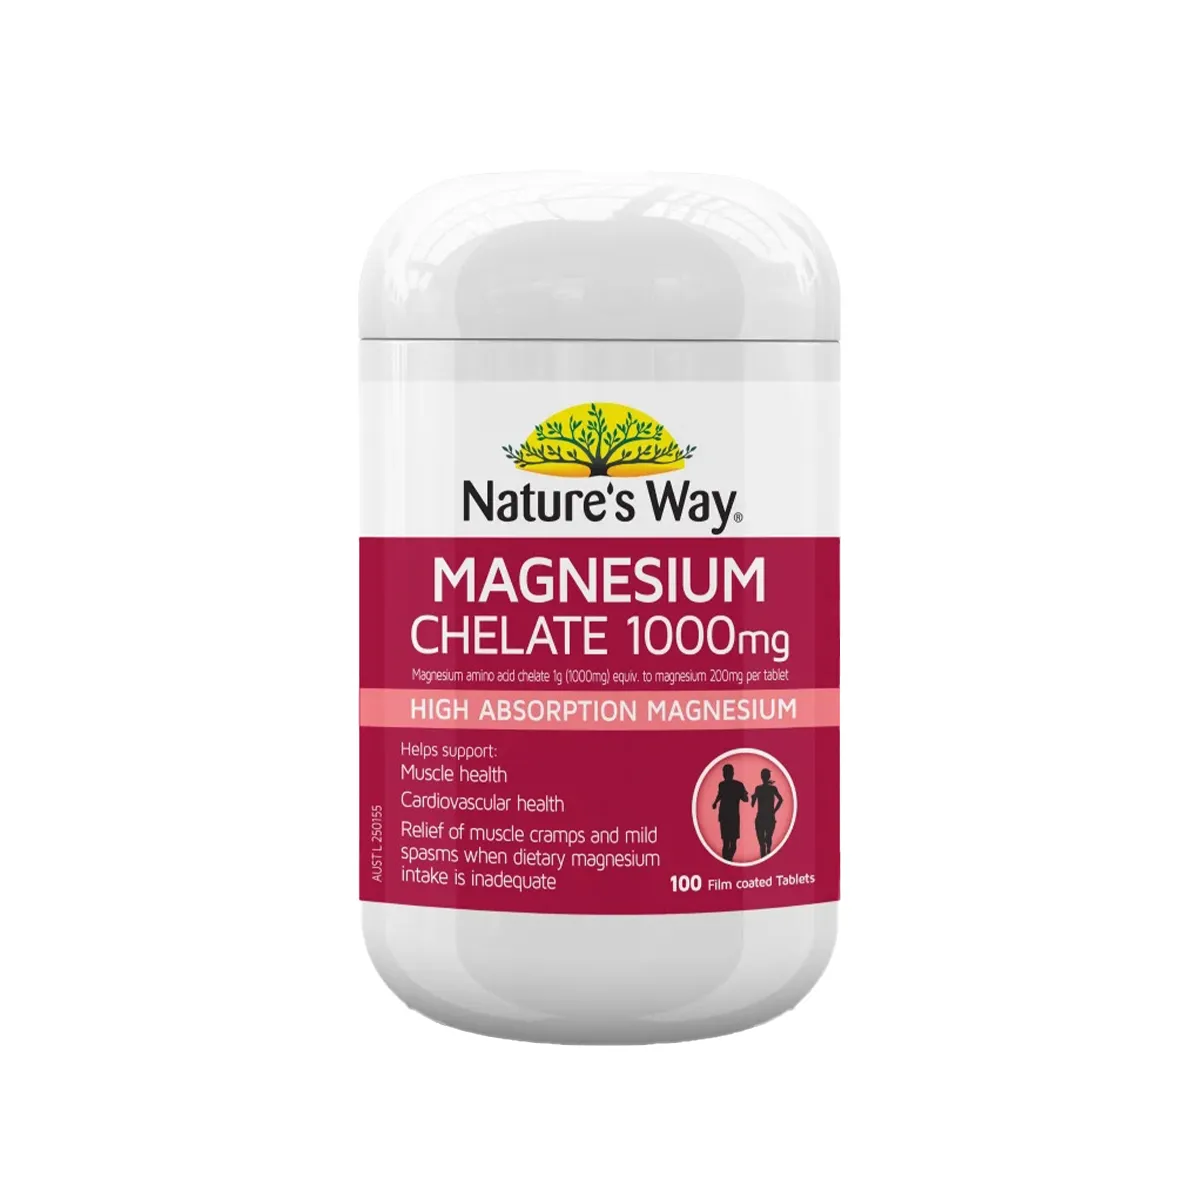 Nature's Way Magnesium Chelate 1000mg Tablets 100s